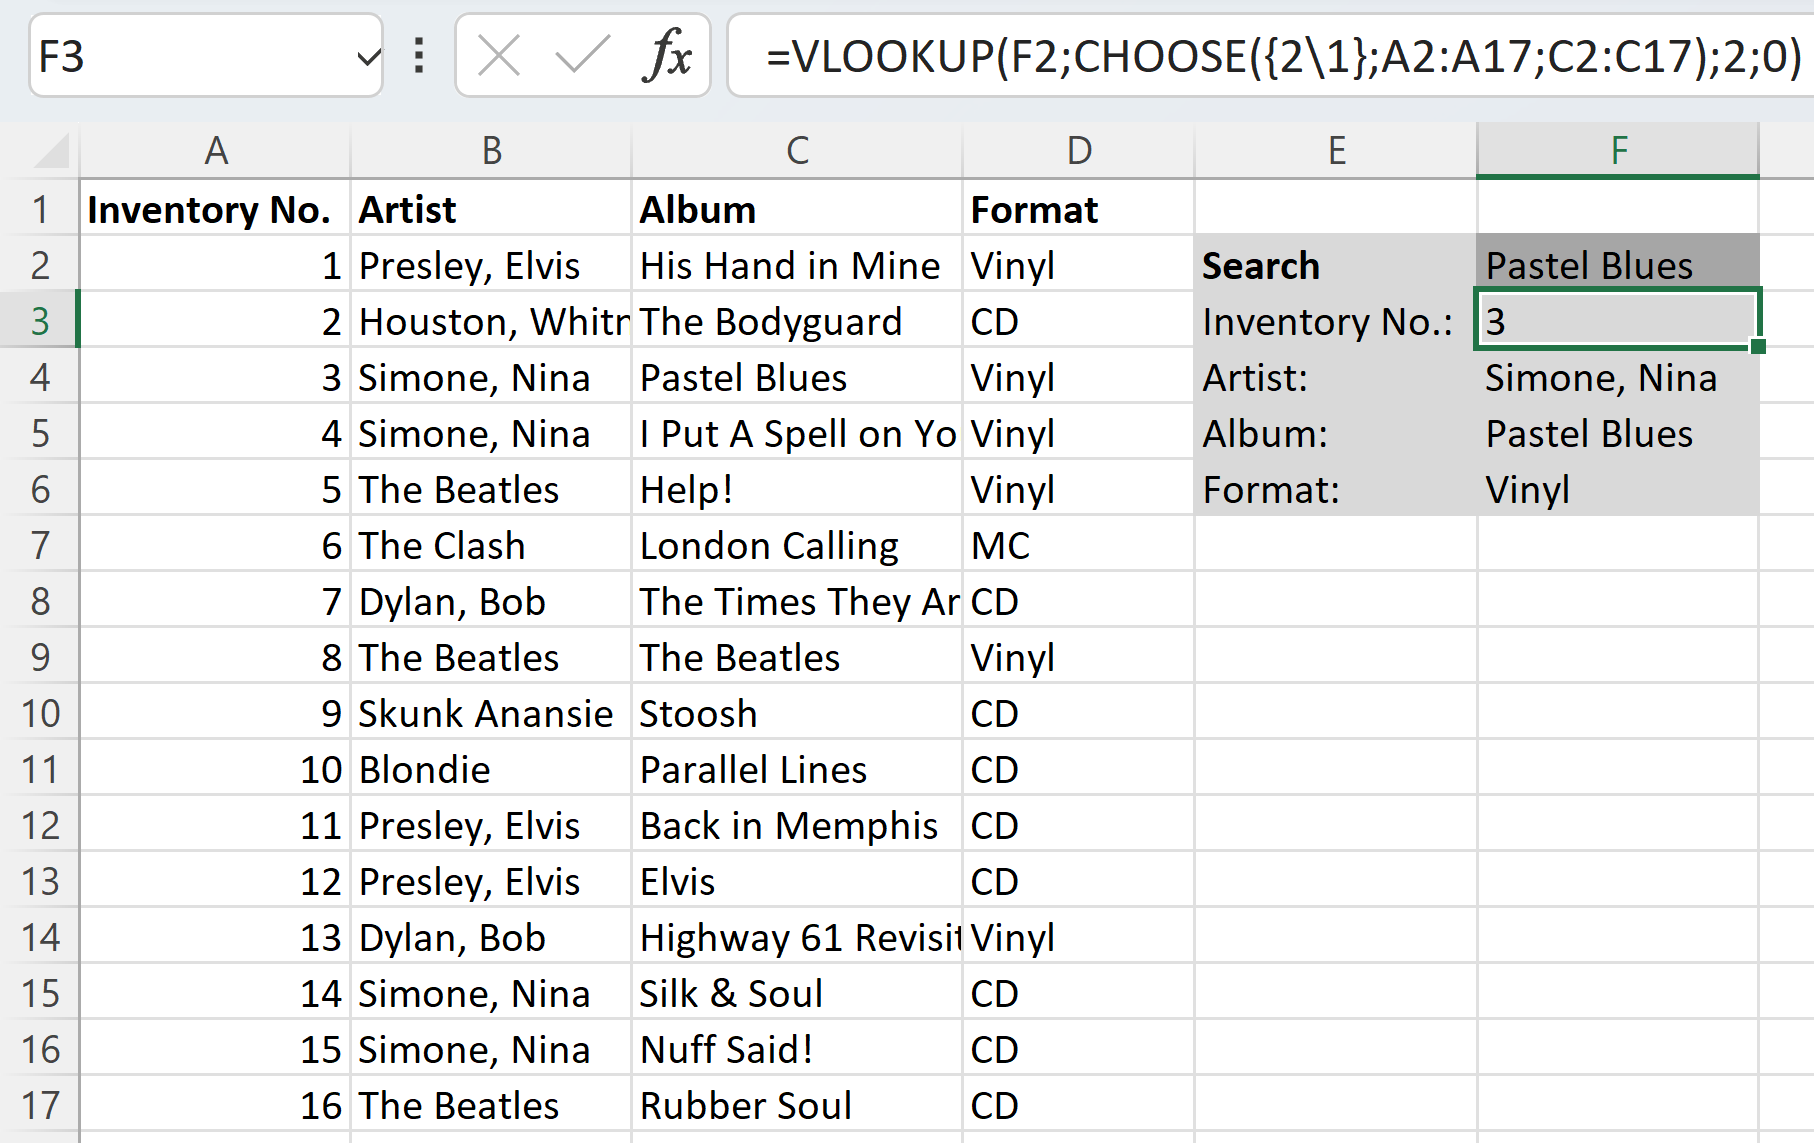 Customized VLOOKUP example using CHOOSE